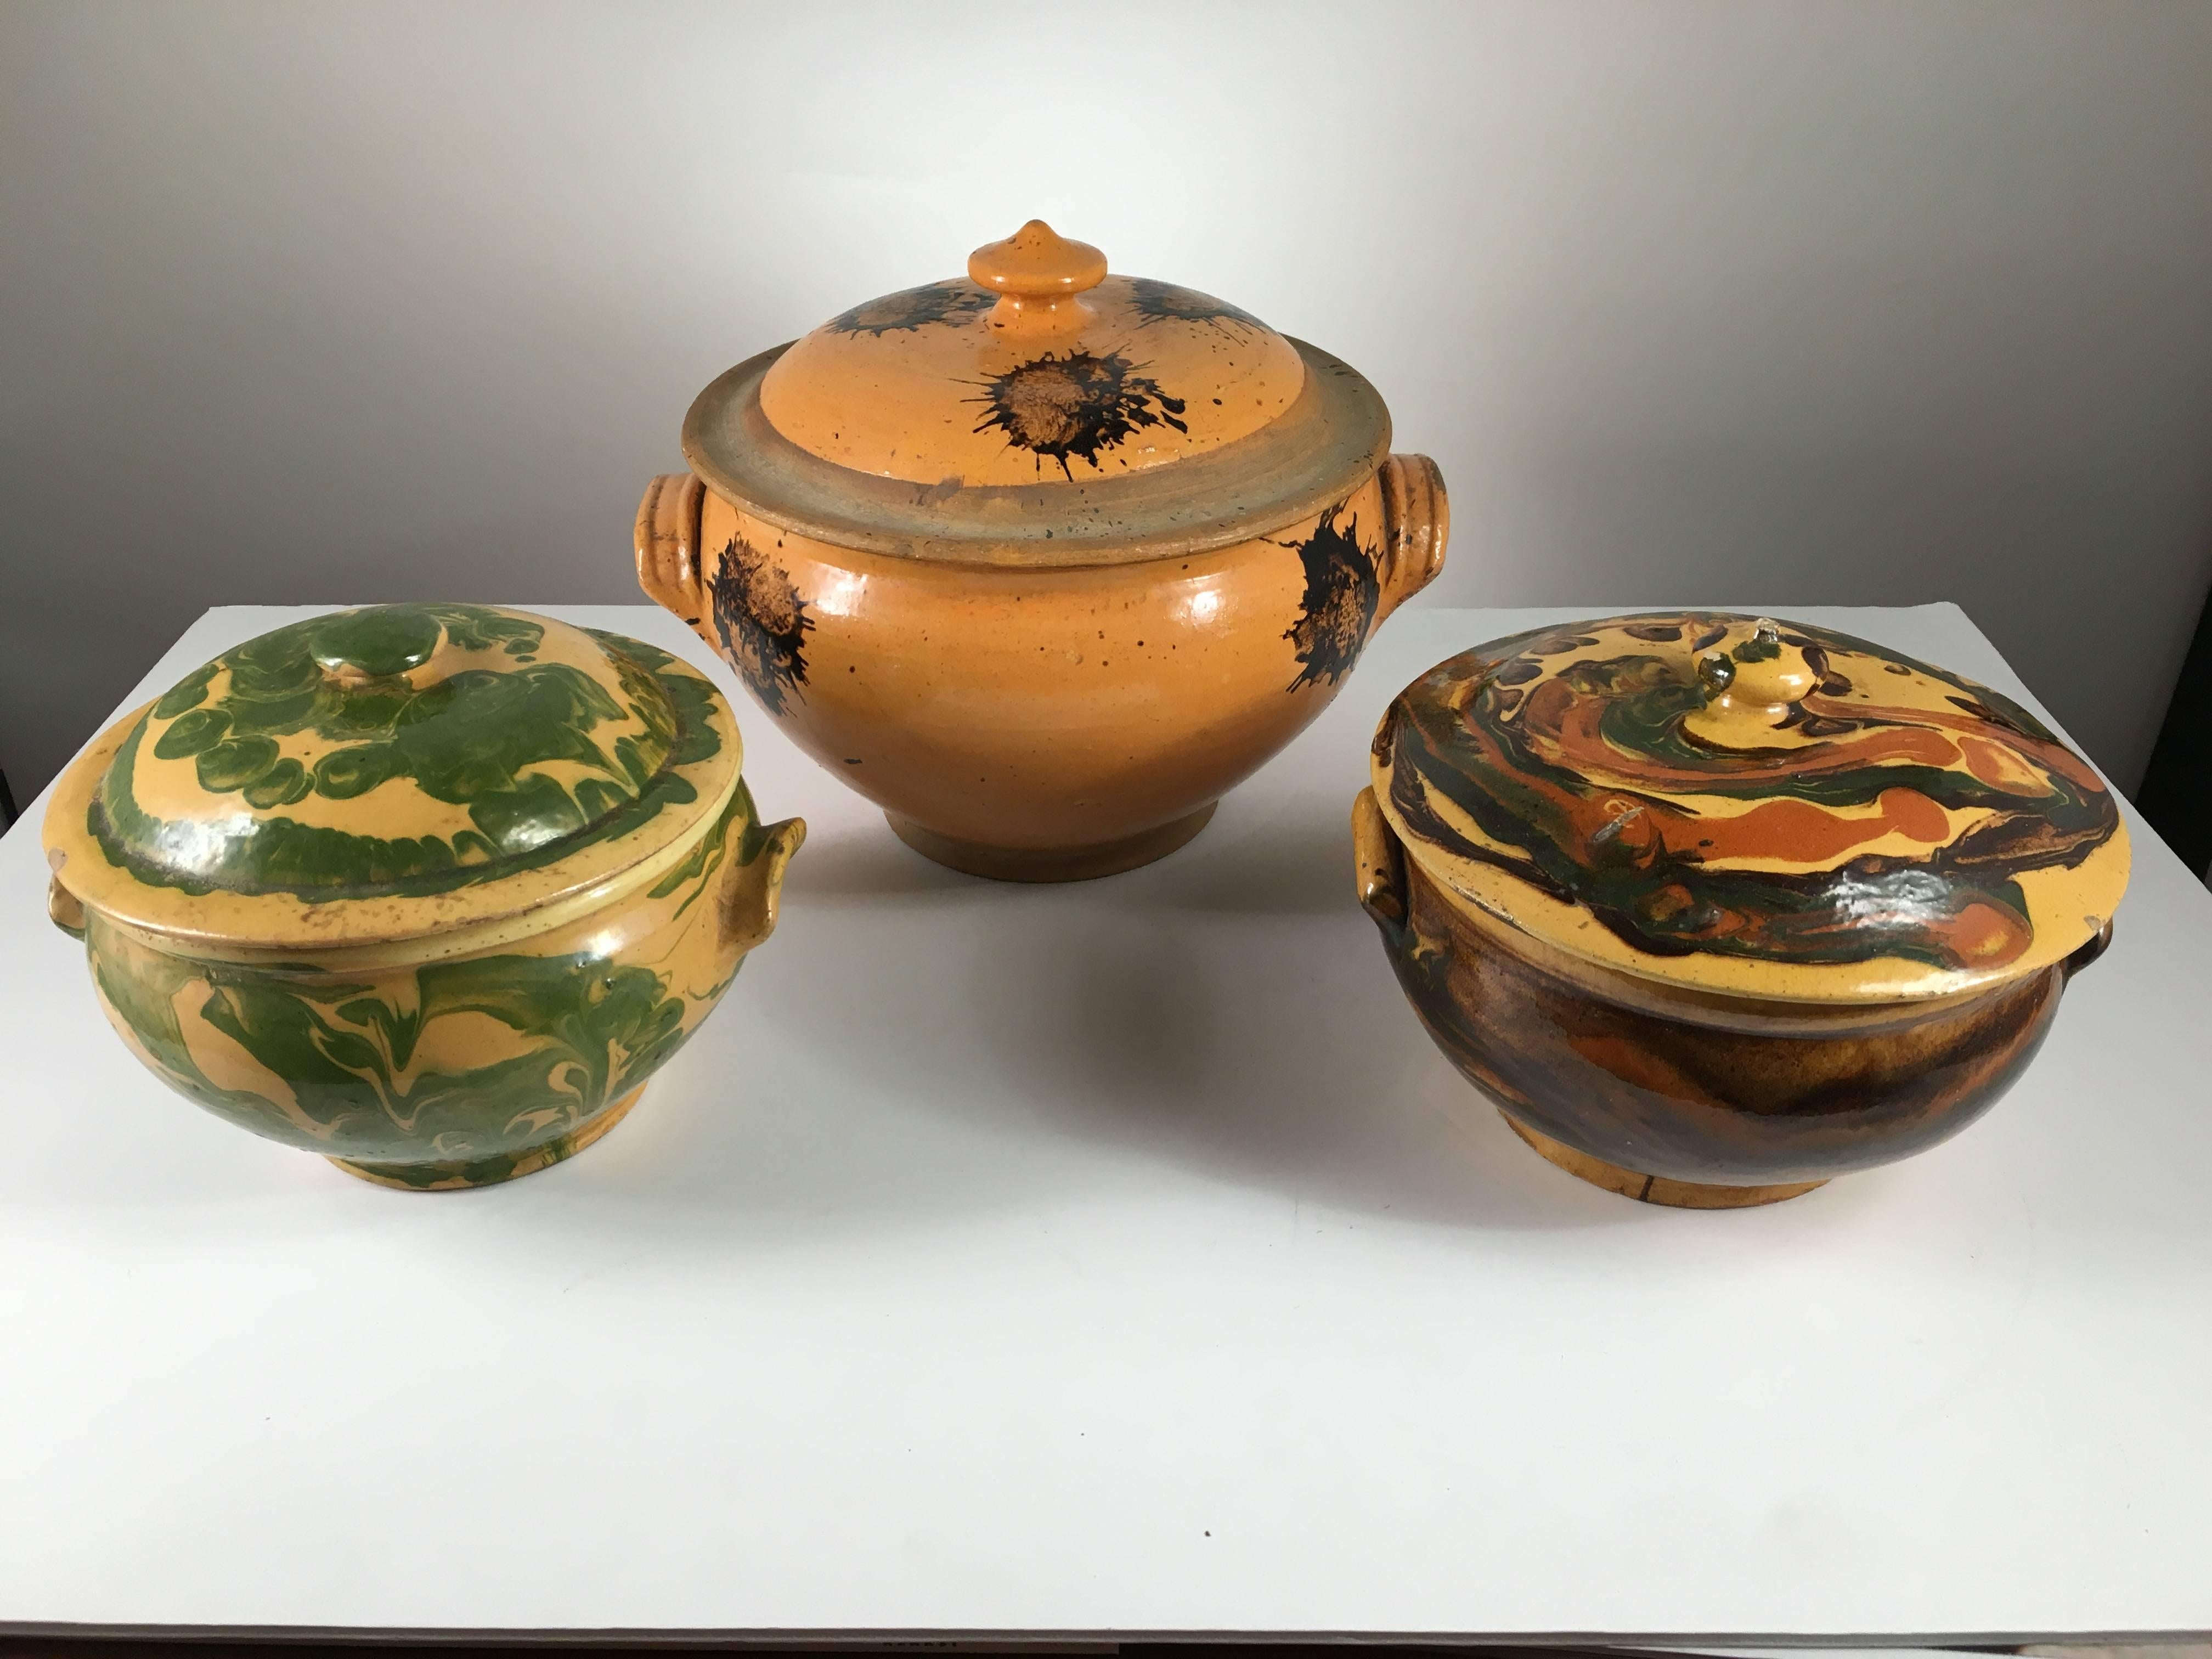 A nice collection of three French Provincial Jaspe tureens with lids from the Savoire region, late 19th century, from the collection of Pierre Moulin, author of French Country style books and founder of the Pierre Deux shops.